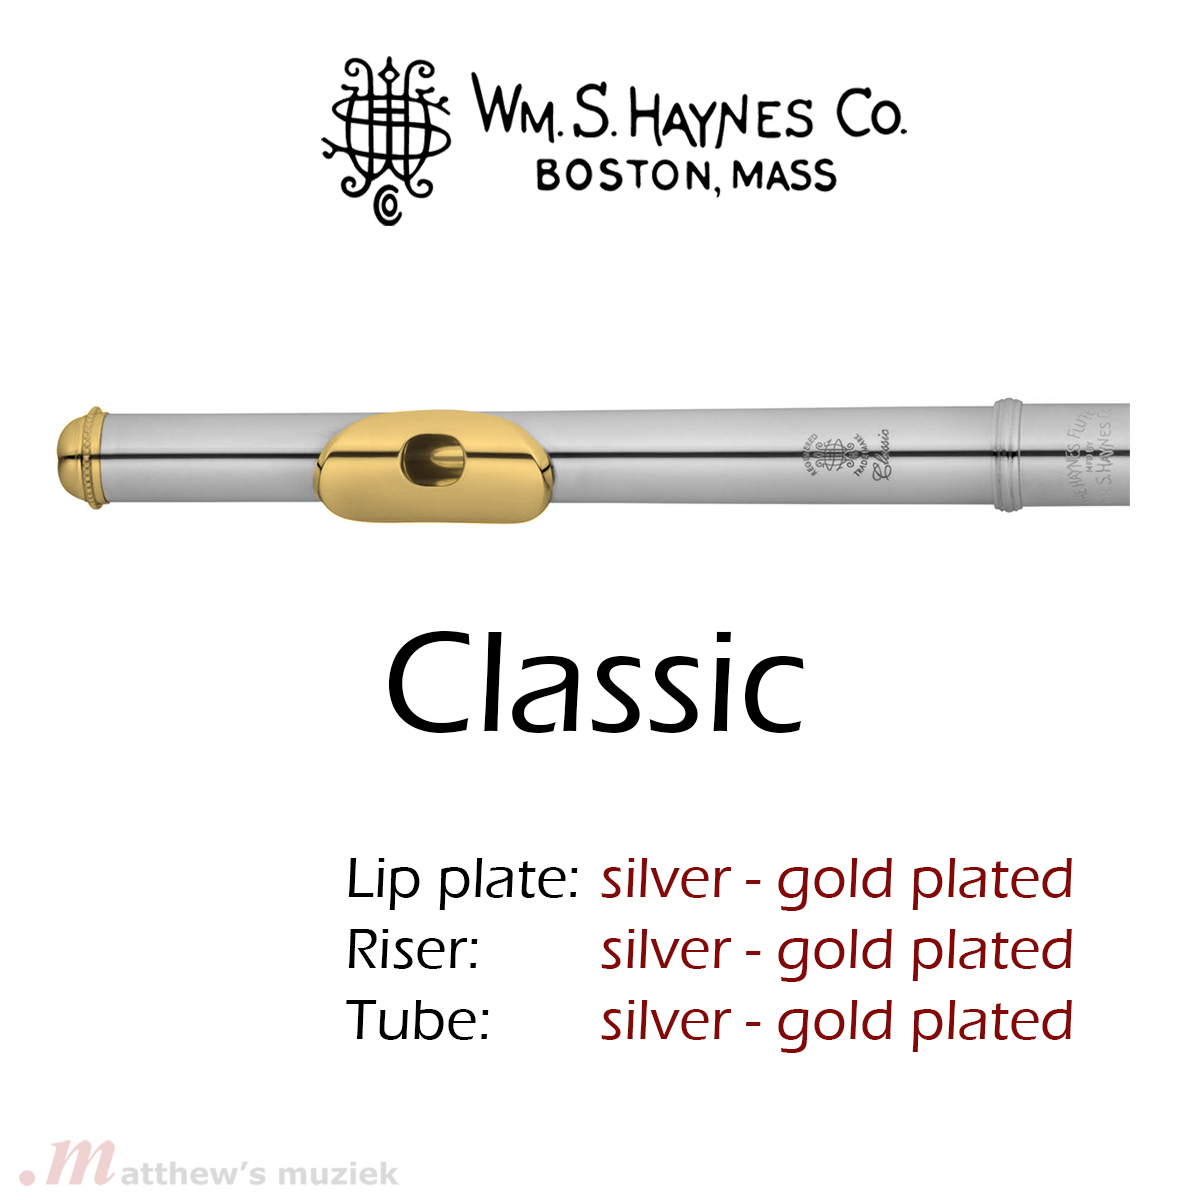 Haynes Flute Headjoint - Classic Silver - Gold Plated Lip Plate